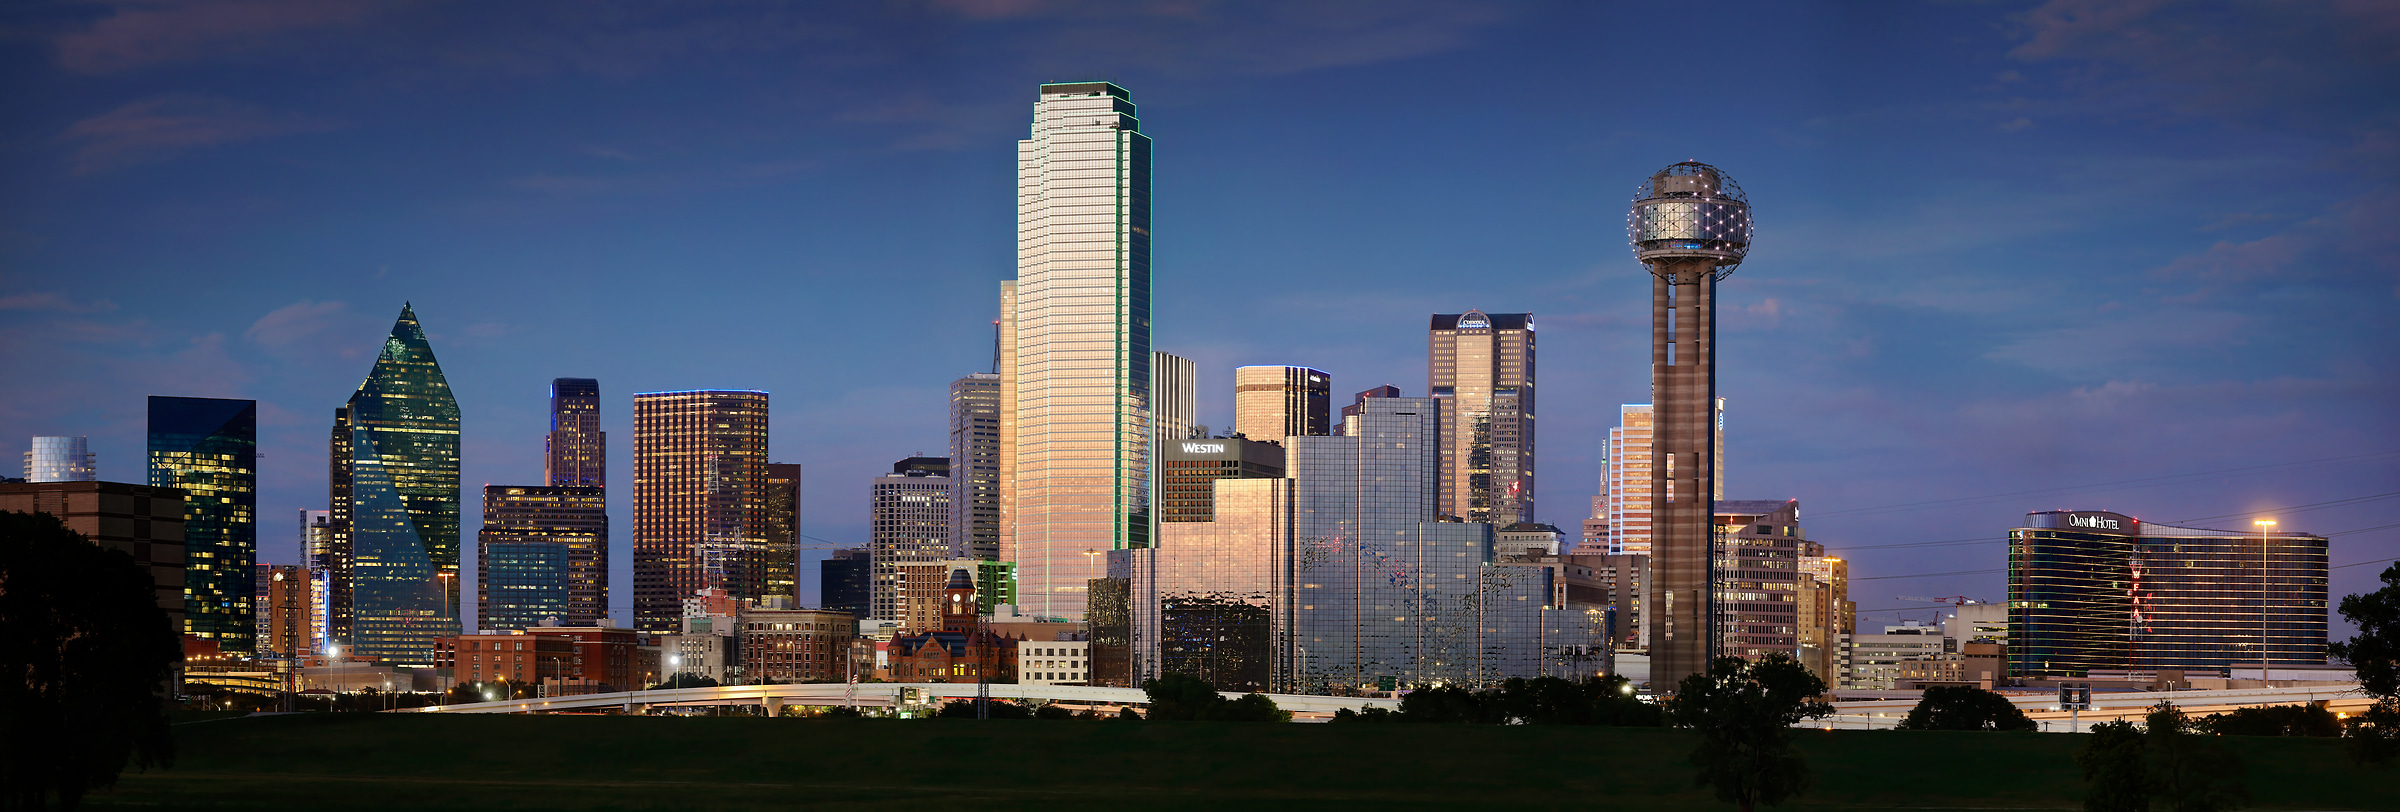 382 megapixels! A very high resolution, large-format VAST photo print of the Dallas, Texas skyline at dusk; panorama photograph created by Phil Crawshay in Dallas, Texas